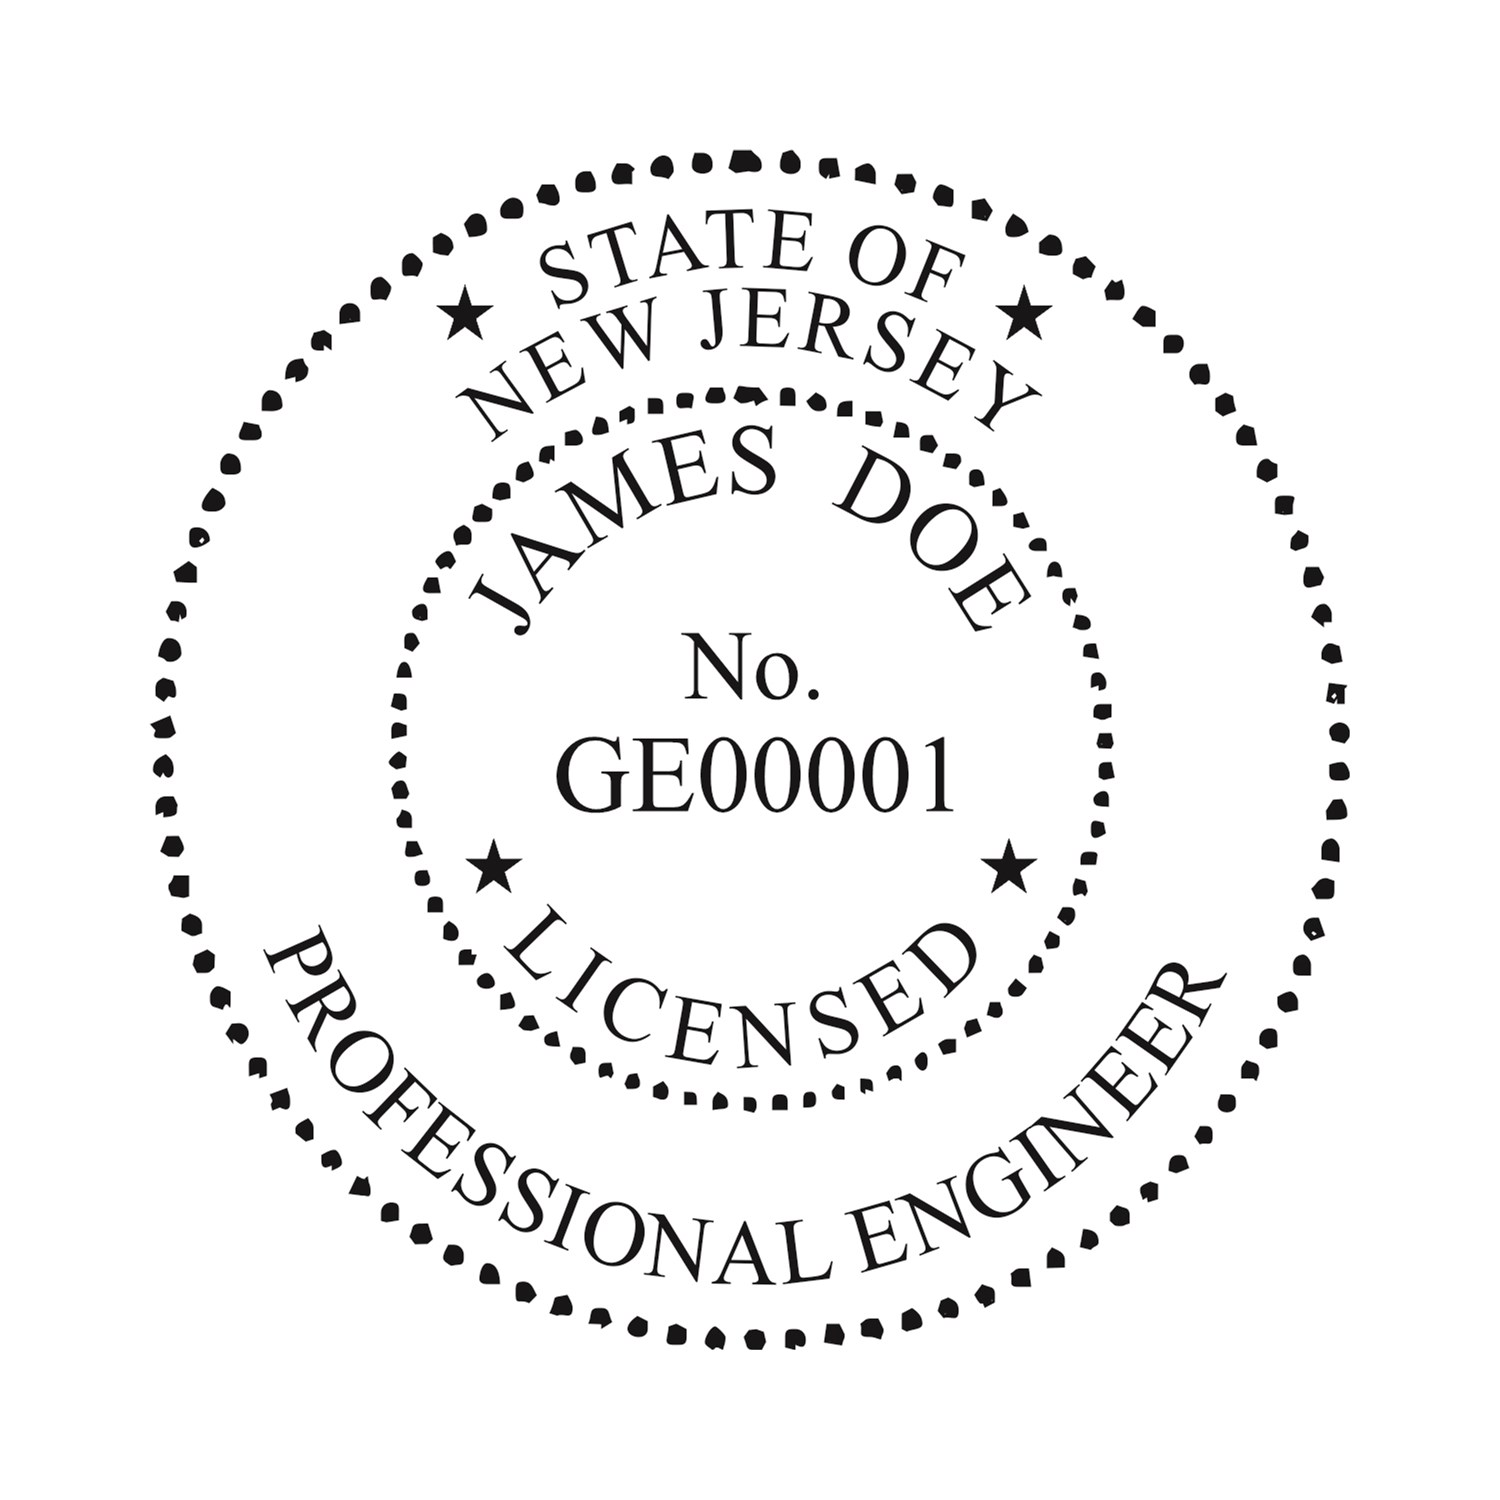 Engineer Seal - Pocket Style - New Jersey